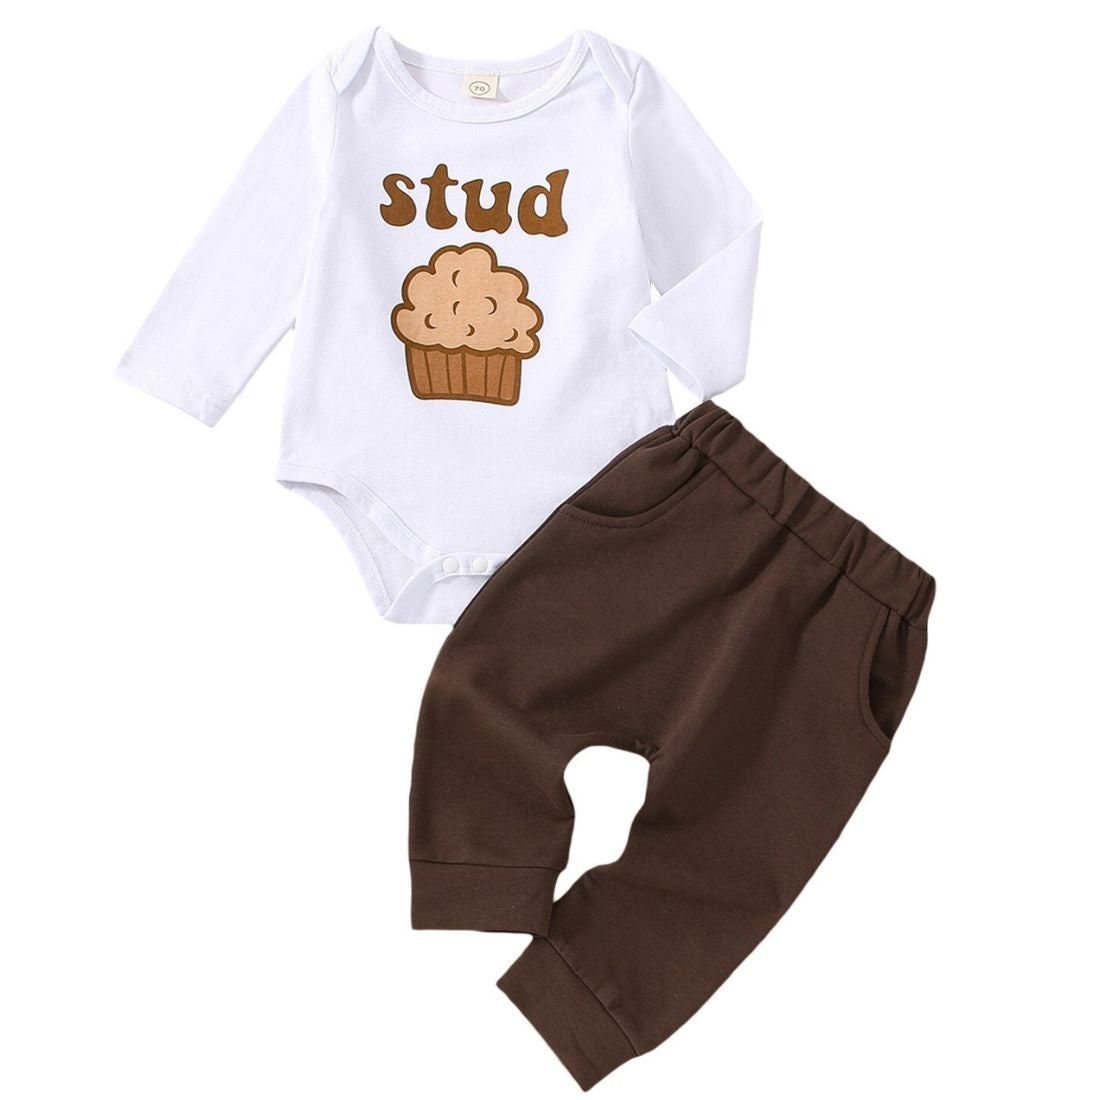 A trendy baby boys white bodysuit with a stud muffin print and brown pants clothing set